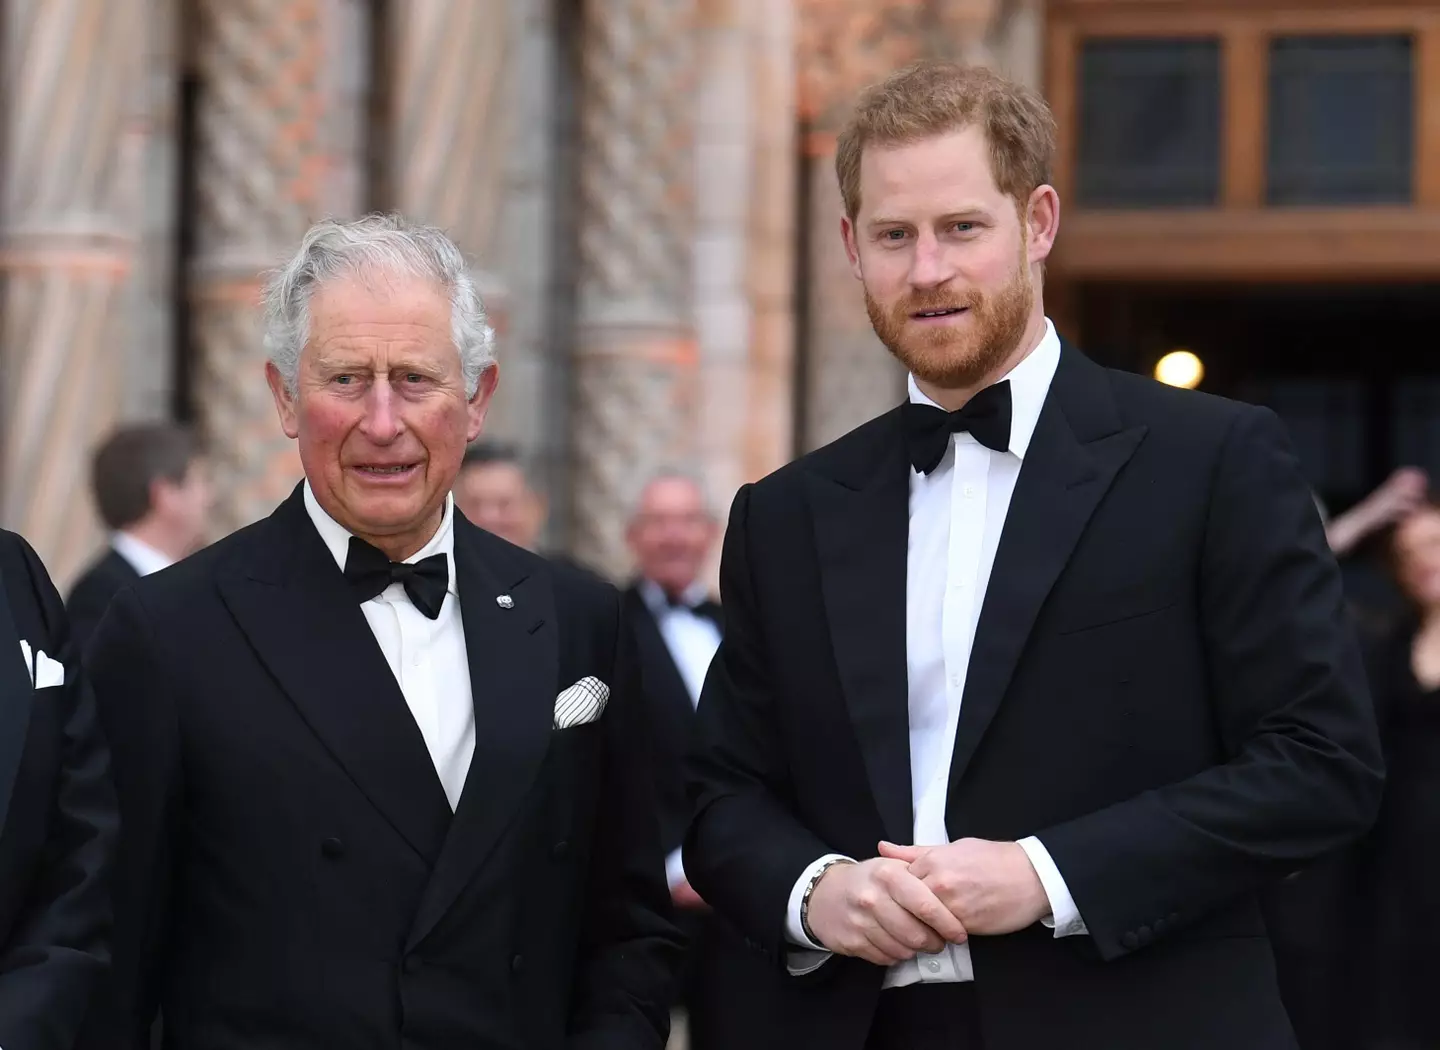 Simon Charles Dorante-Day alleges that he and Prince Harry share a bond.